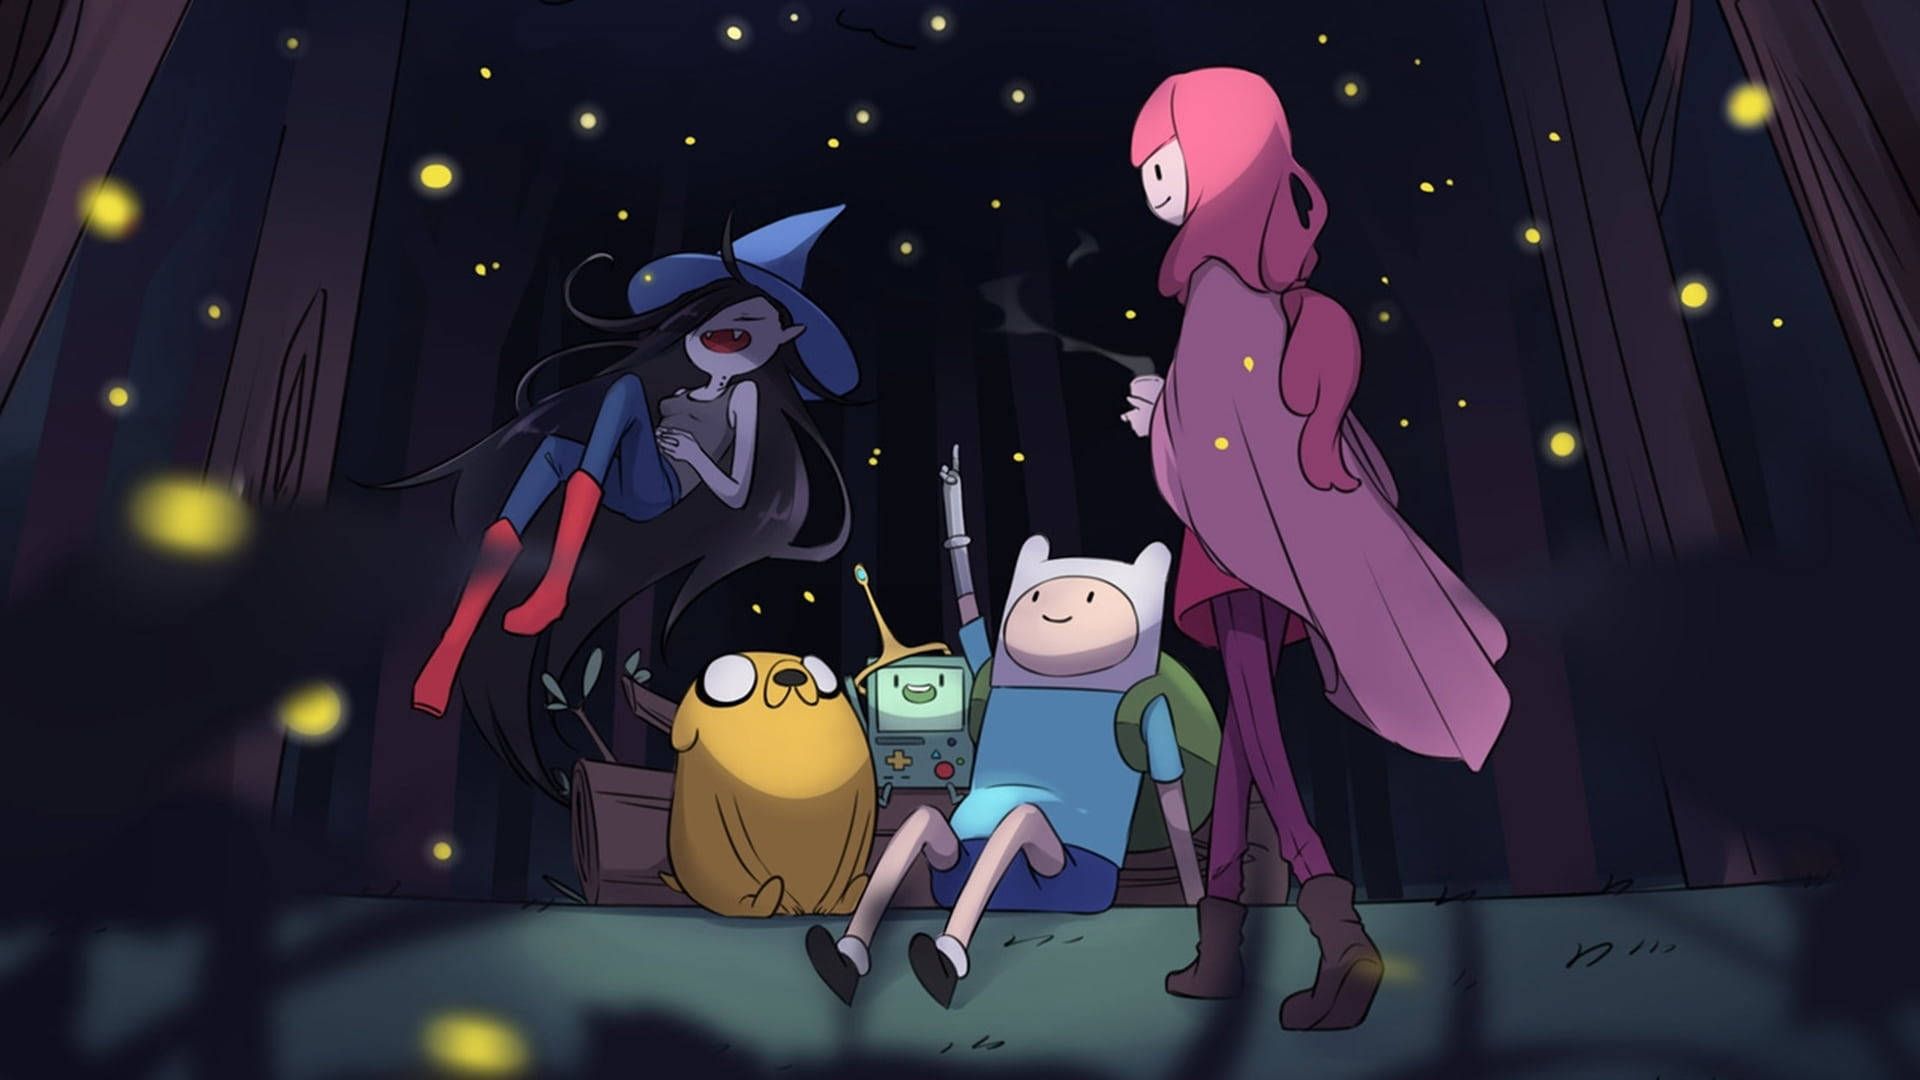 Adventure Time characters in a forest at night, looking up at the sky. - Adventure Time